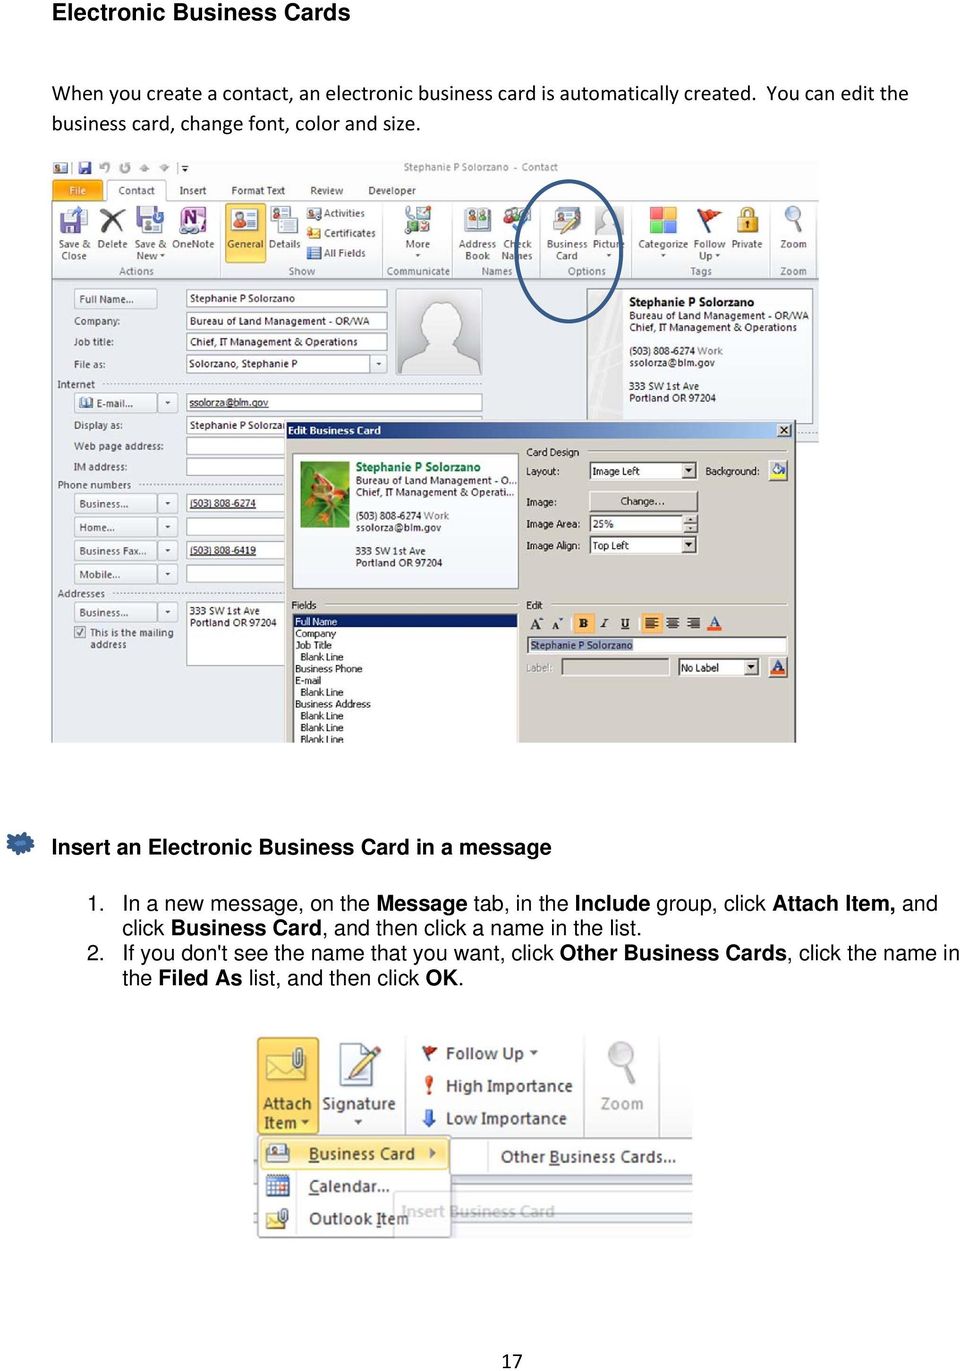 In a new message, on the Message tab, in the Include group, click Attach Item, and click Business Card, and then click a